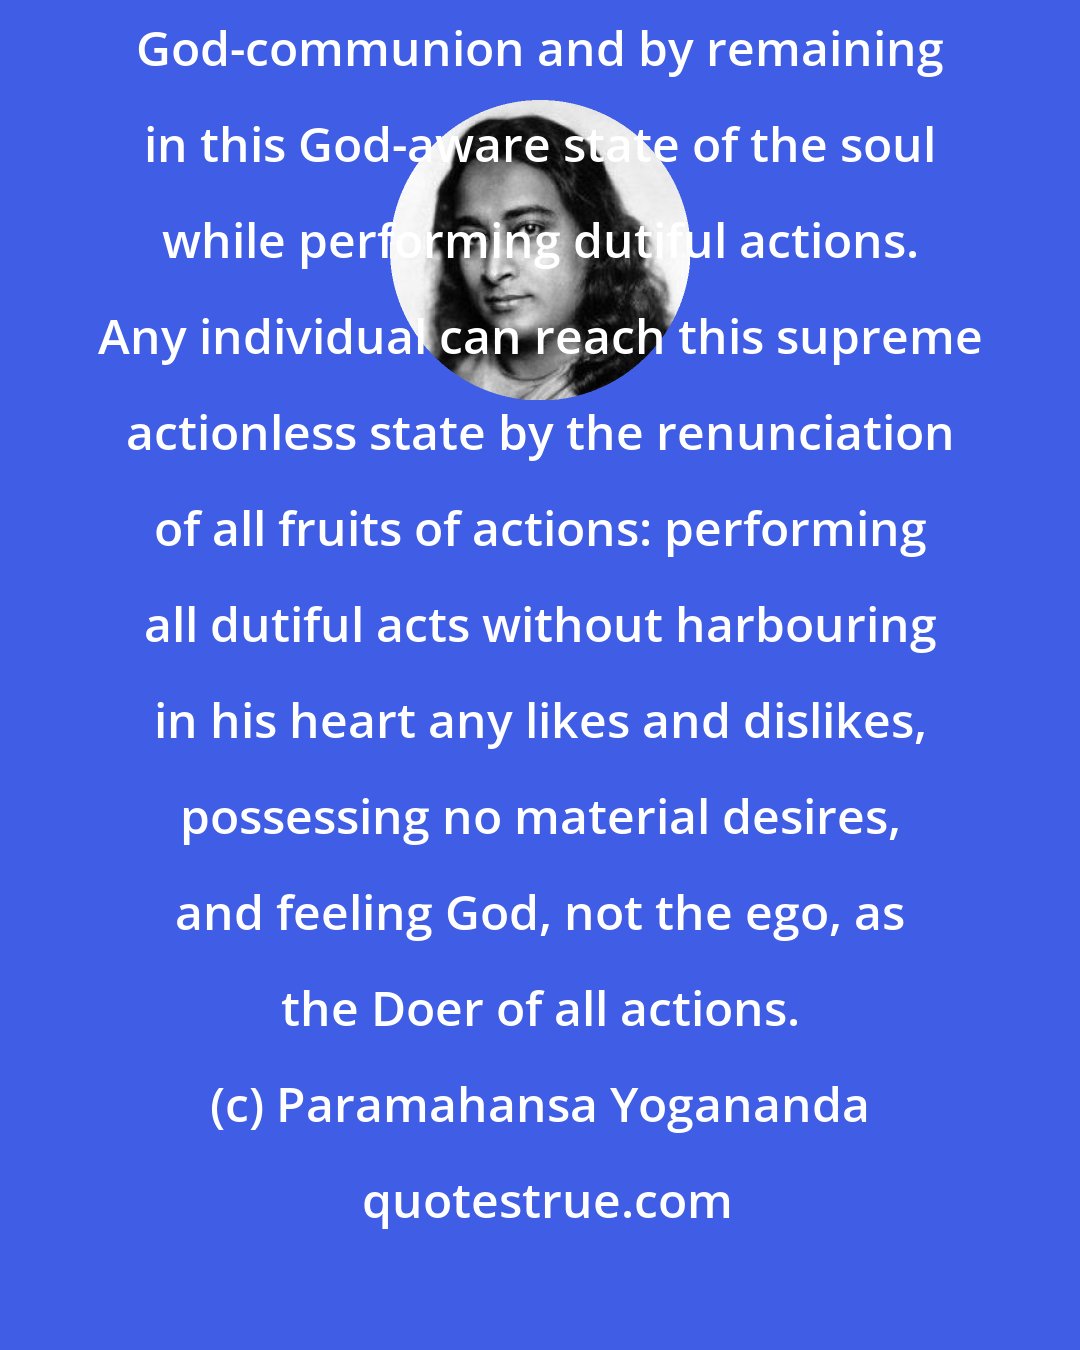 Paramahansa Yogananda: The way to liberation lies through this realization of the Self, by God-communion and by remaining in this God-aware state of the soul while performing dutiful actions. Any individual can reach this supreme actionless state by the renunciation of all fruits of actions: performing all dutiful acts without harbouring in his heart any likes and dislikes, possessing no material desires, and feeling God, not the ego, as the Doer of all actions.